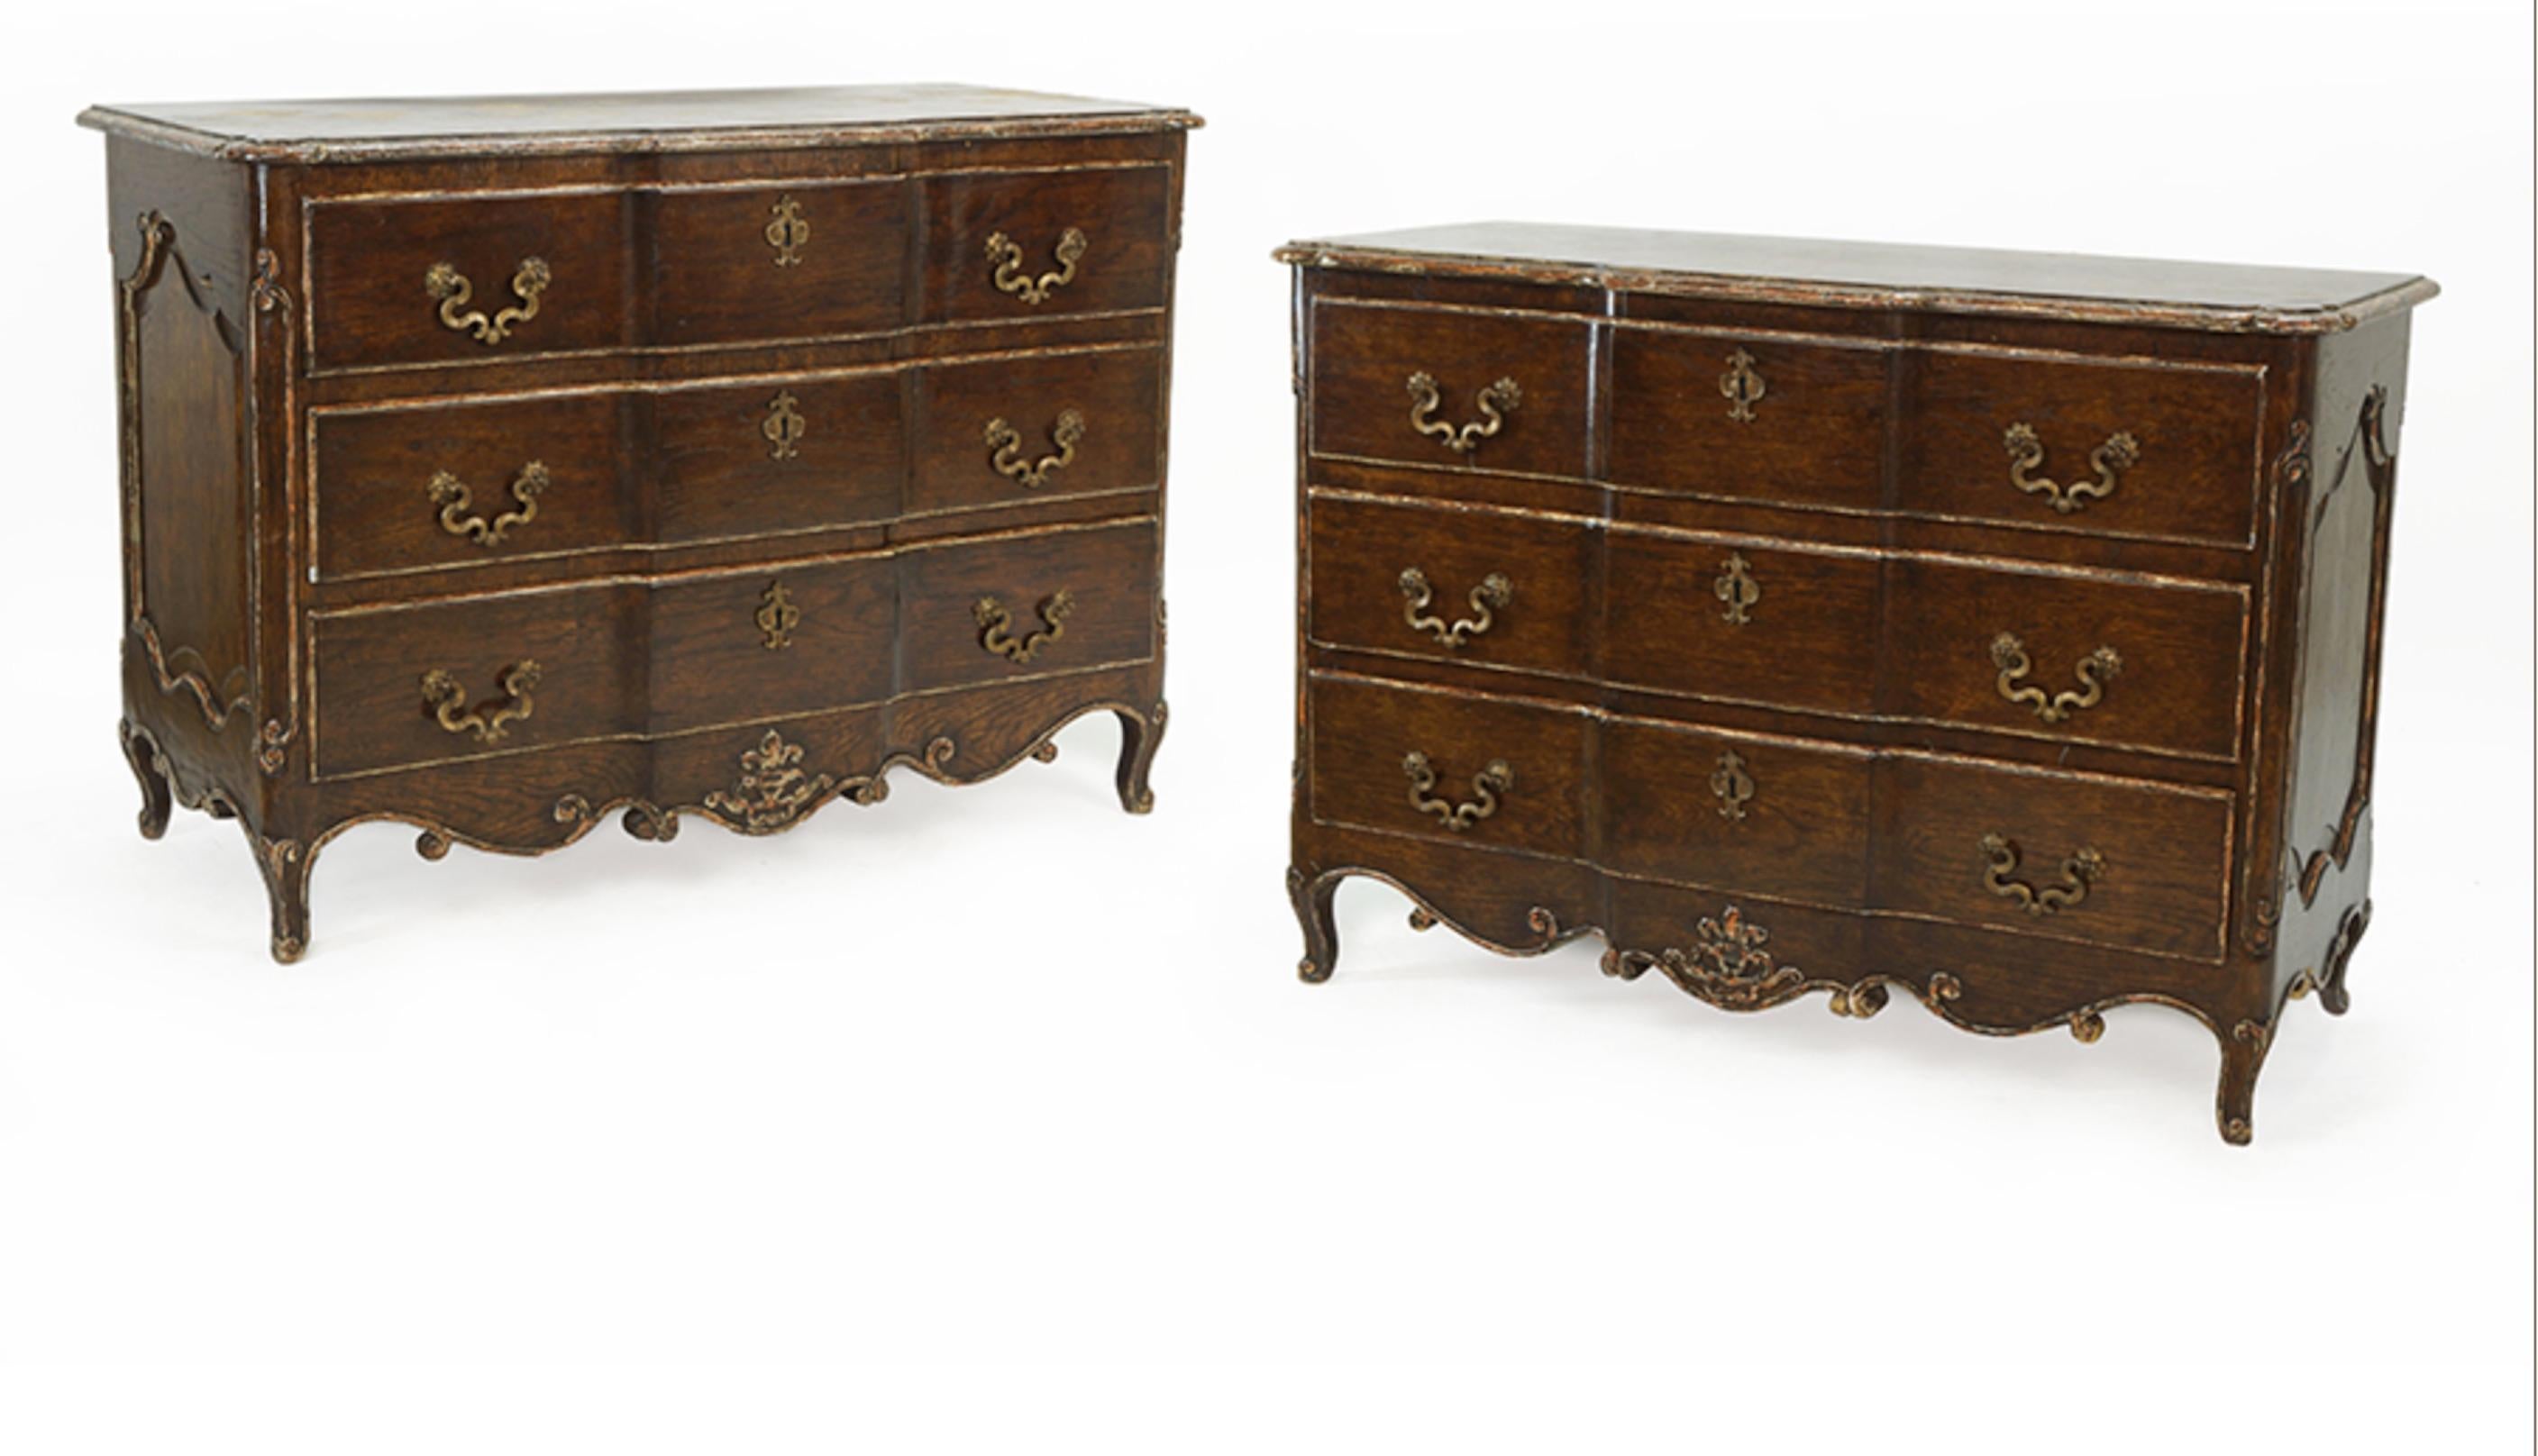 Pair of Louis XV Style Commodes with Painted and Gilt Finish Bronze Hardware (20. Jahrhundert)